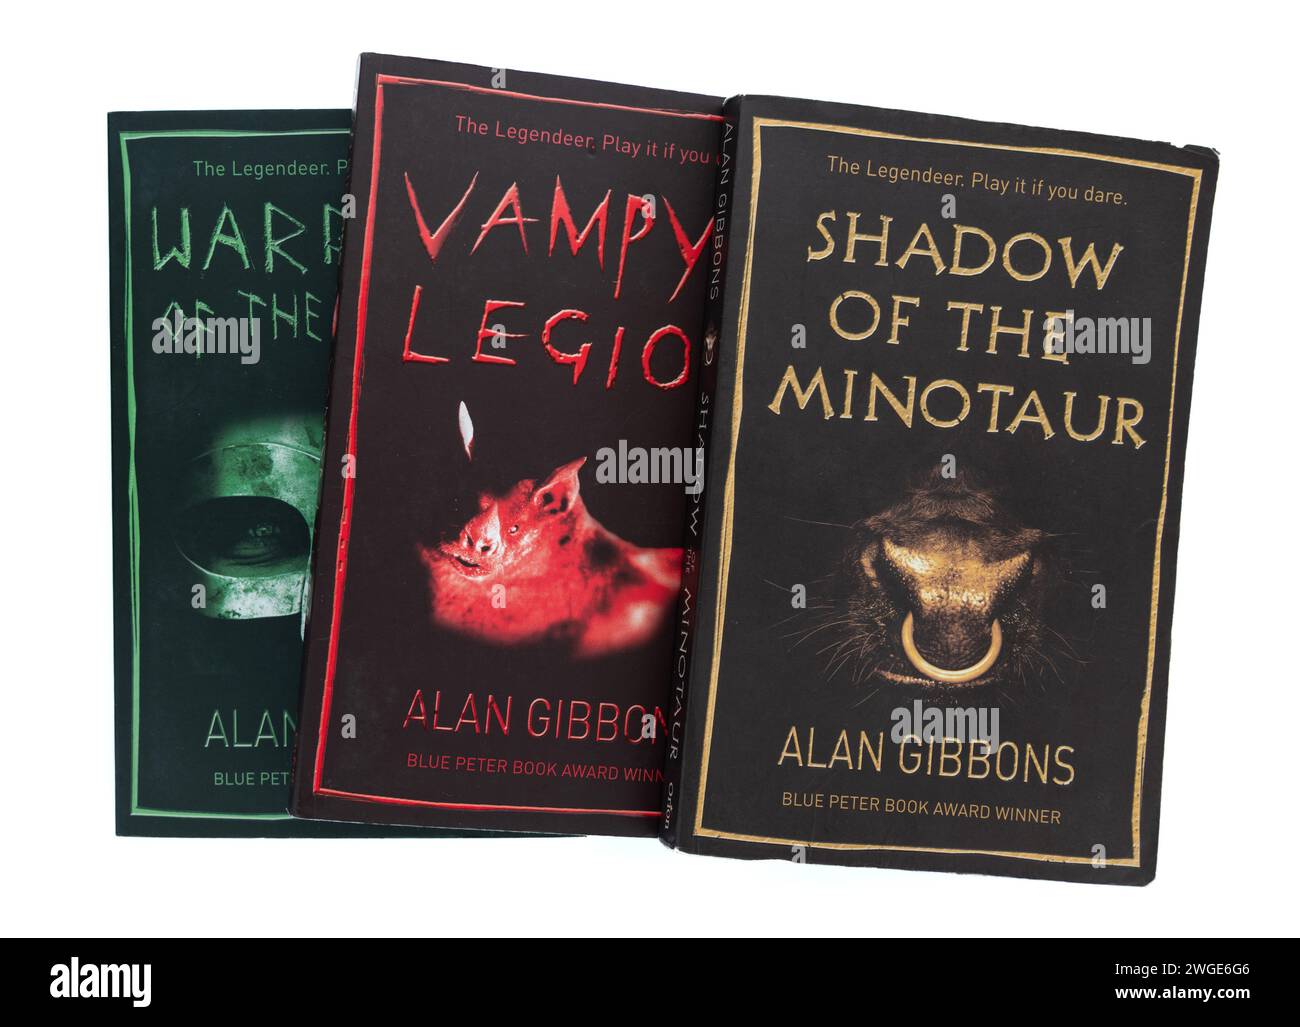 The Legendeer Trilogy - Shadow of the Minotaur, Vampyr Legion and Warriors of the Raven di Alan Gibbons Foto Stock